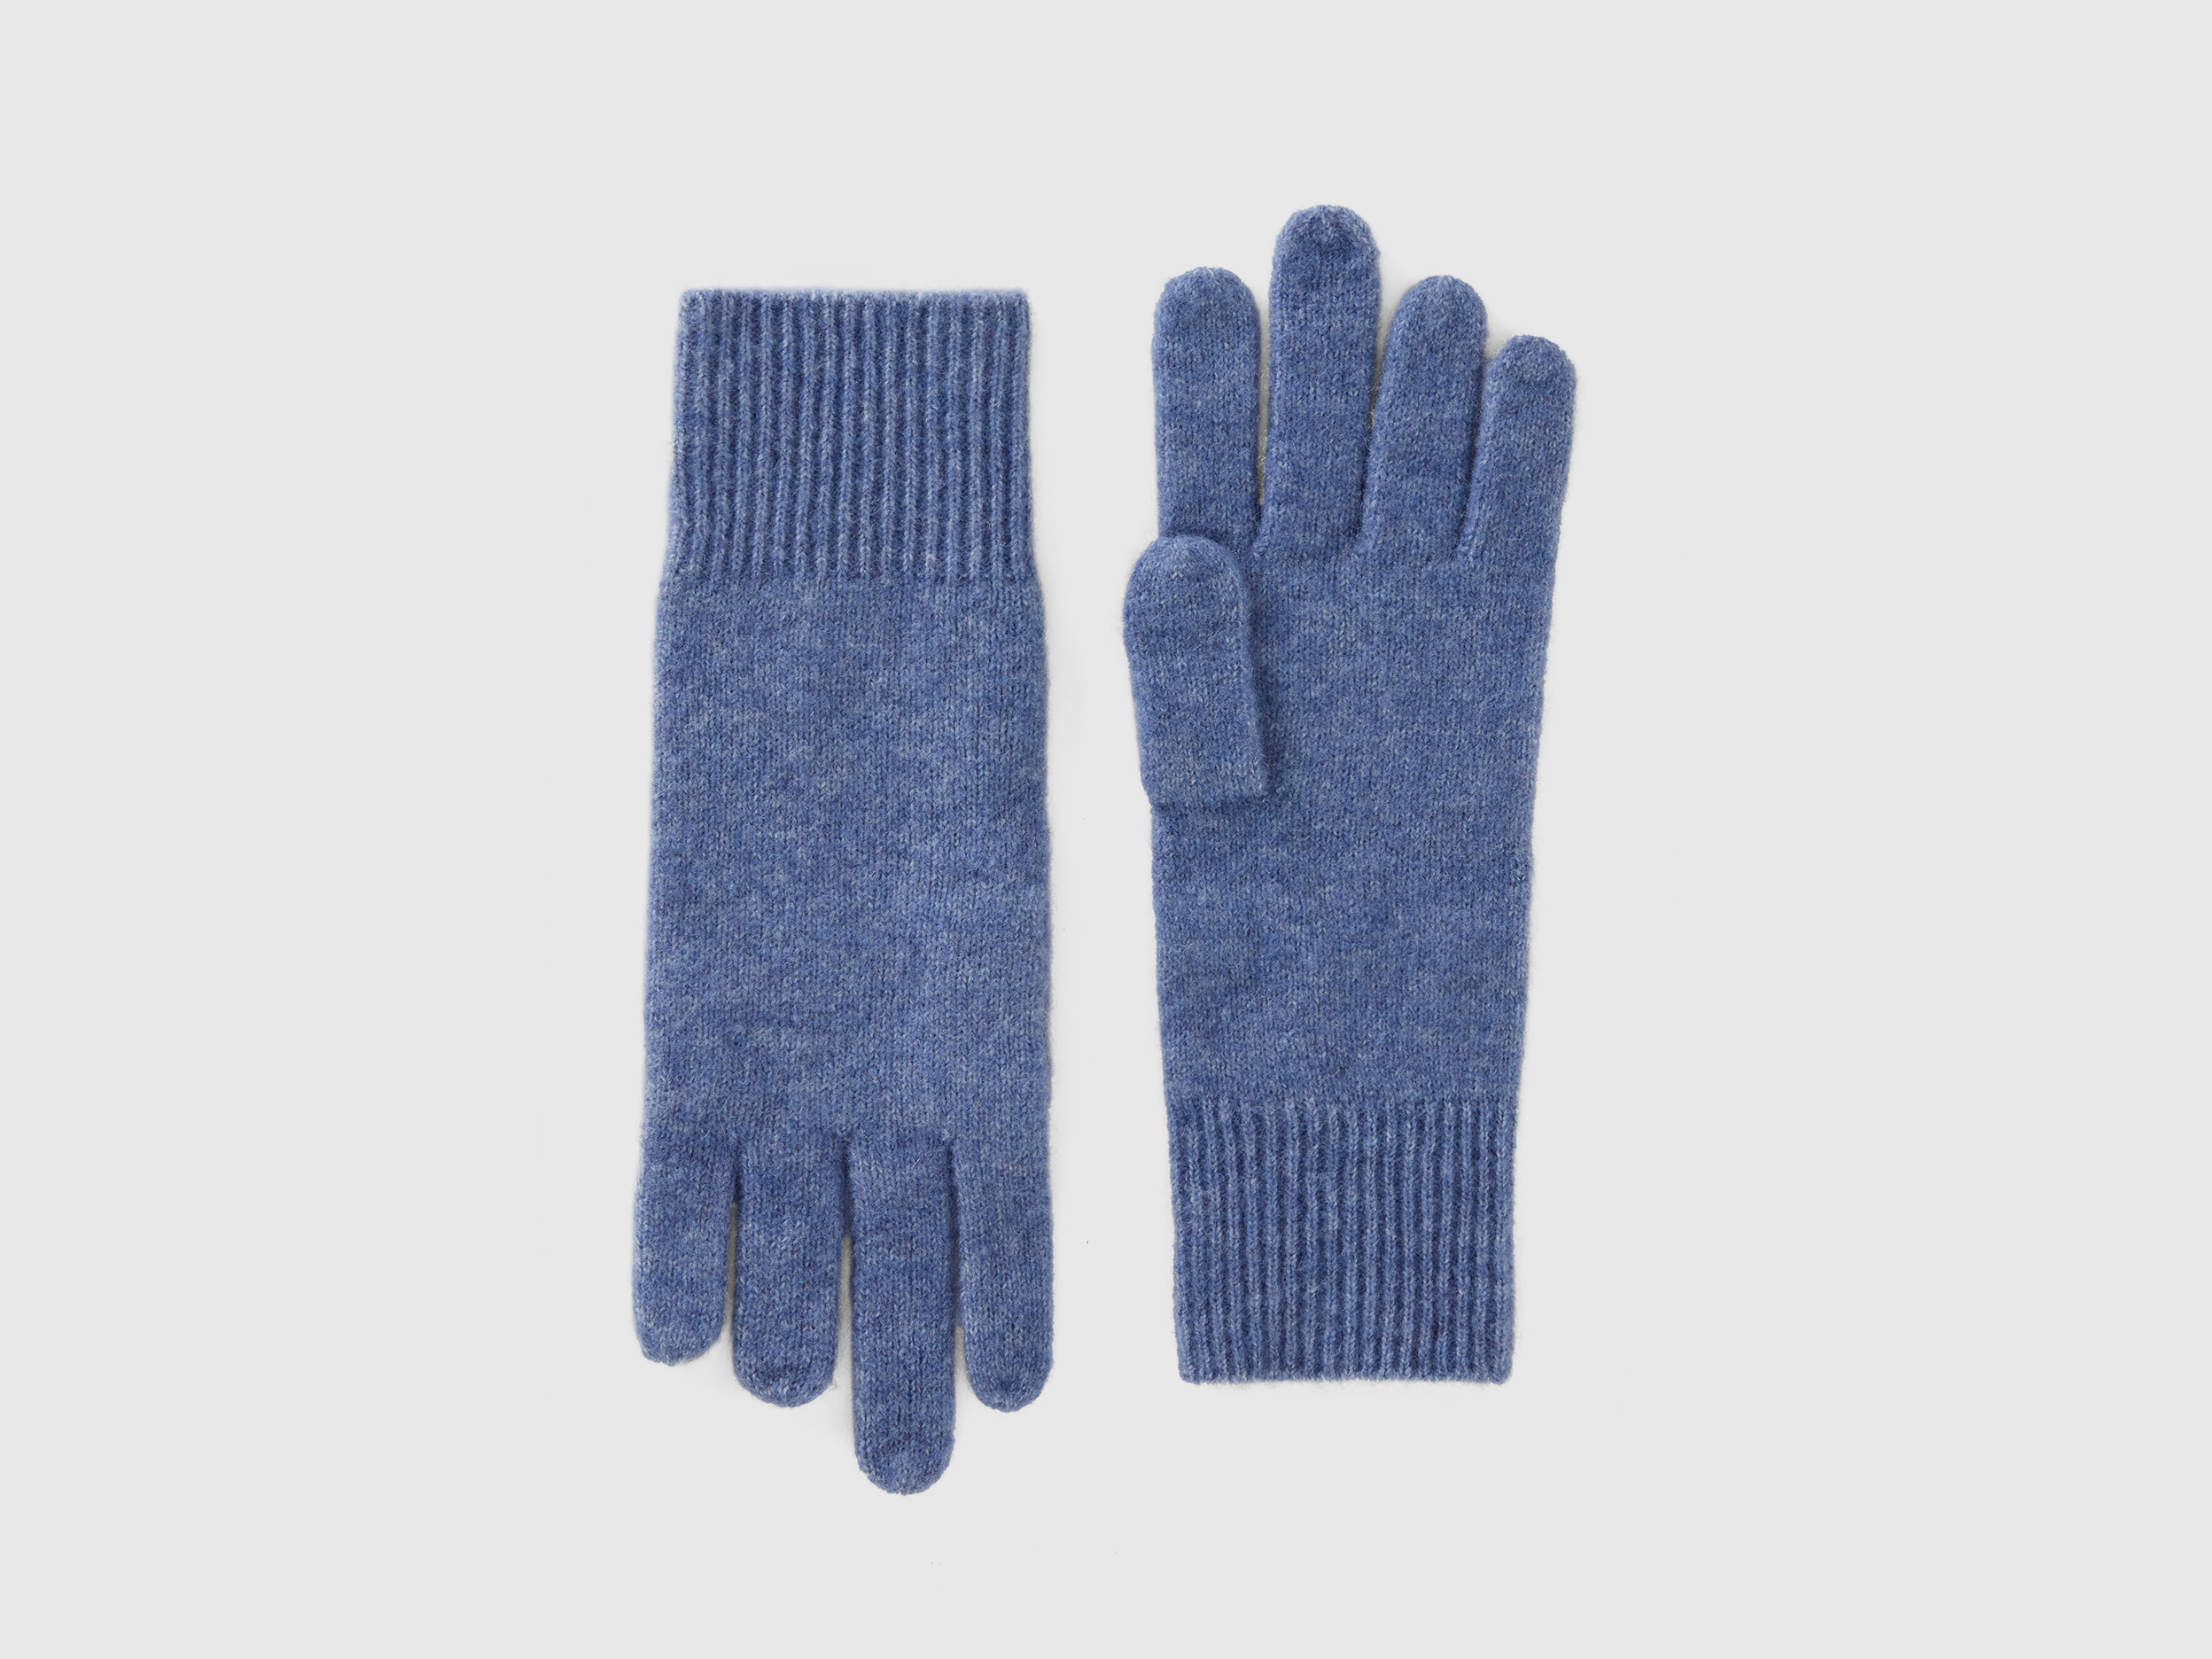 Benetton, Gloves In Recycled Yarn, size OS, Sky Blue, Women